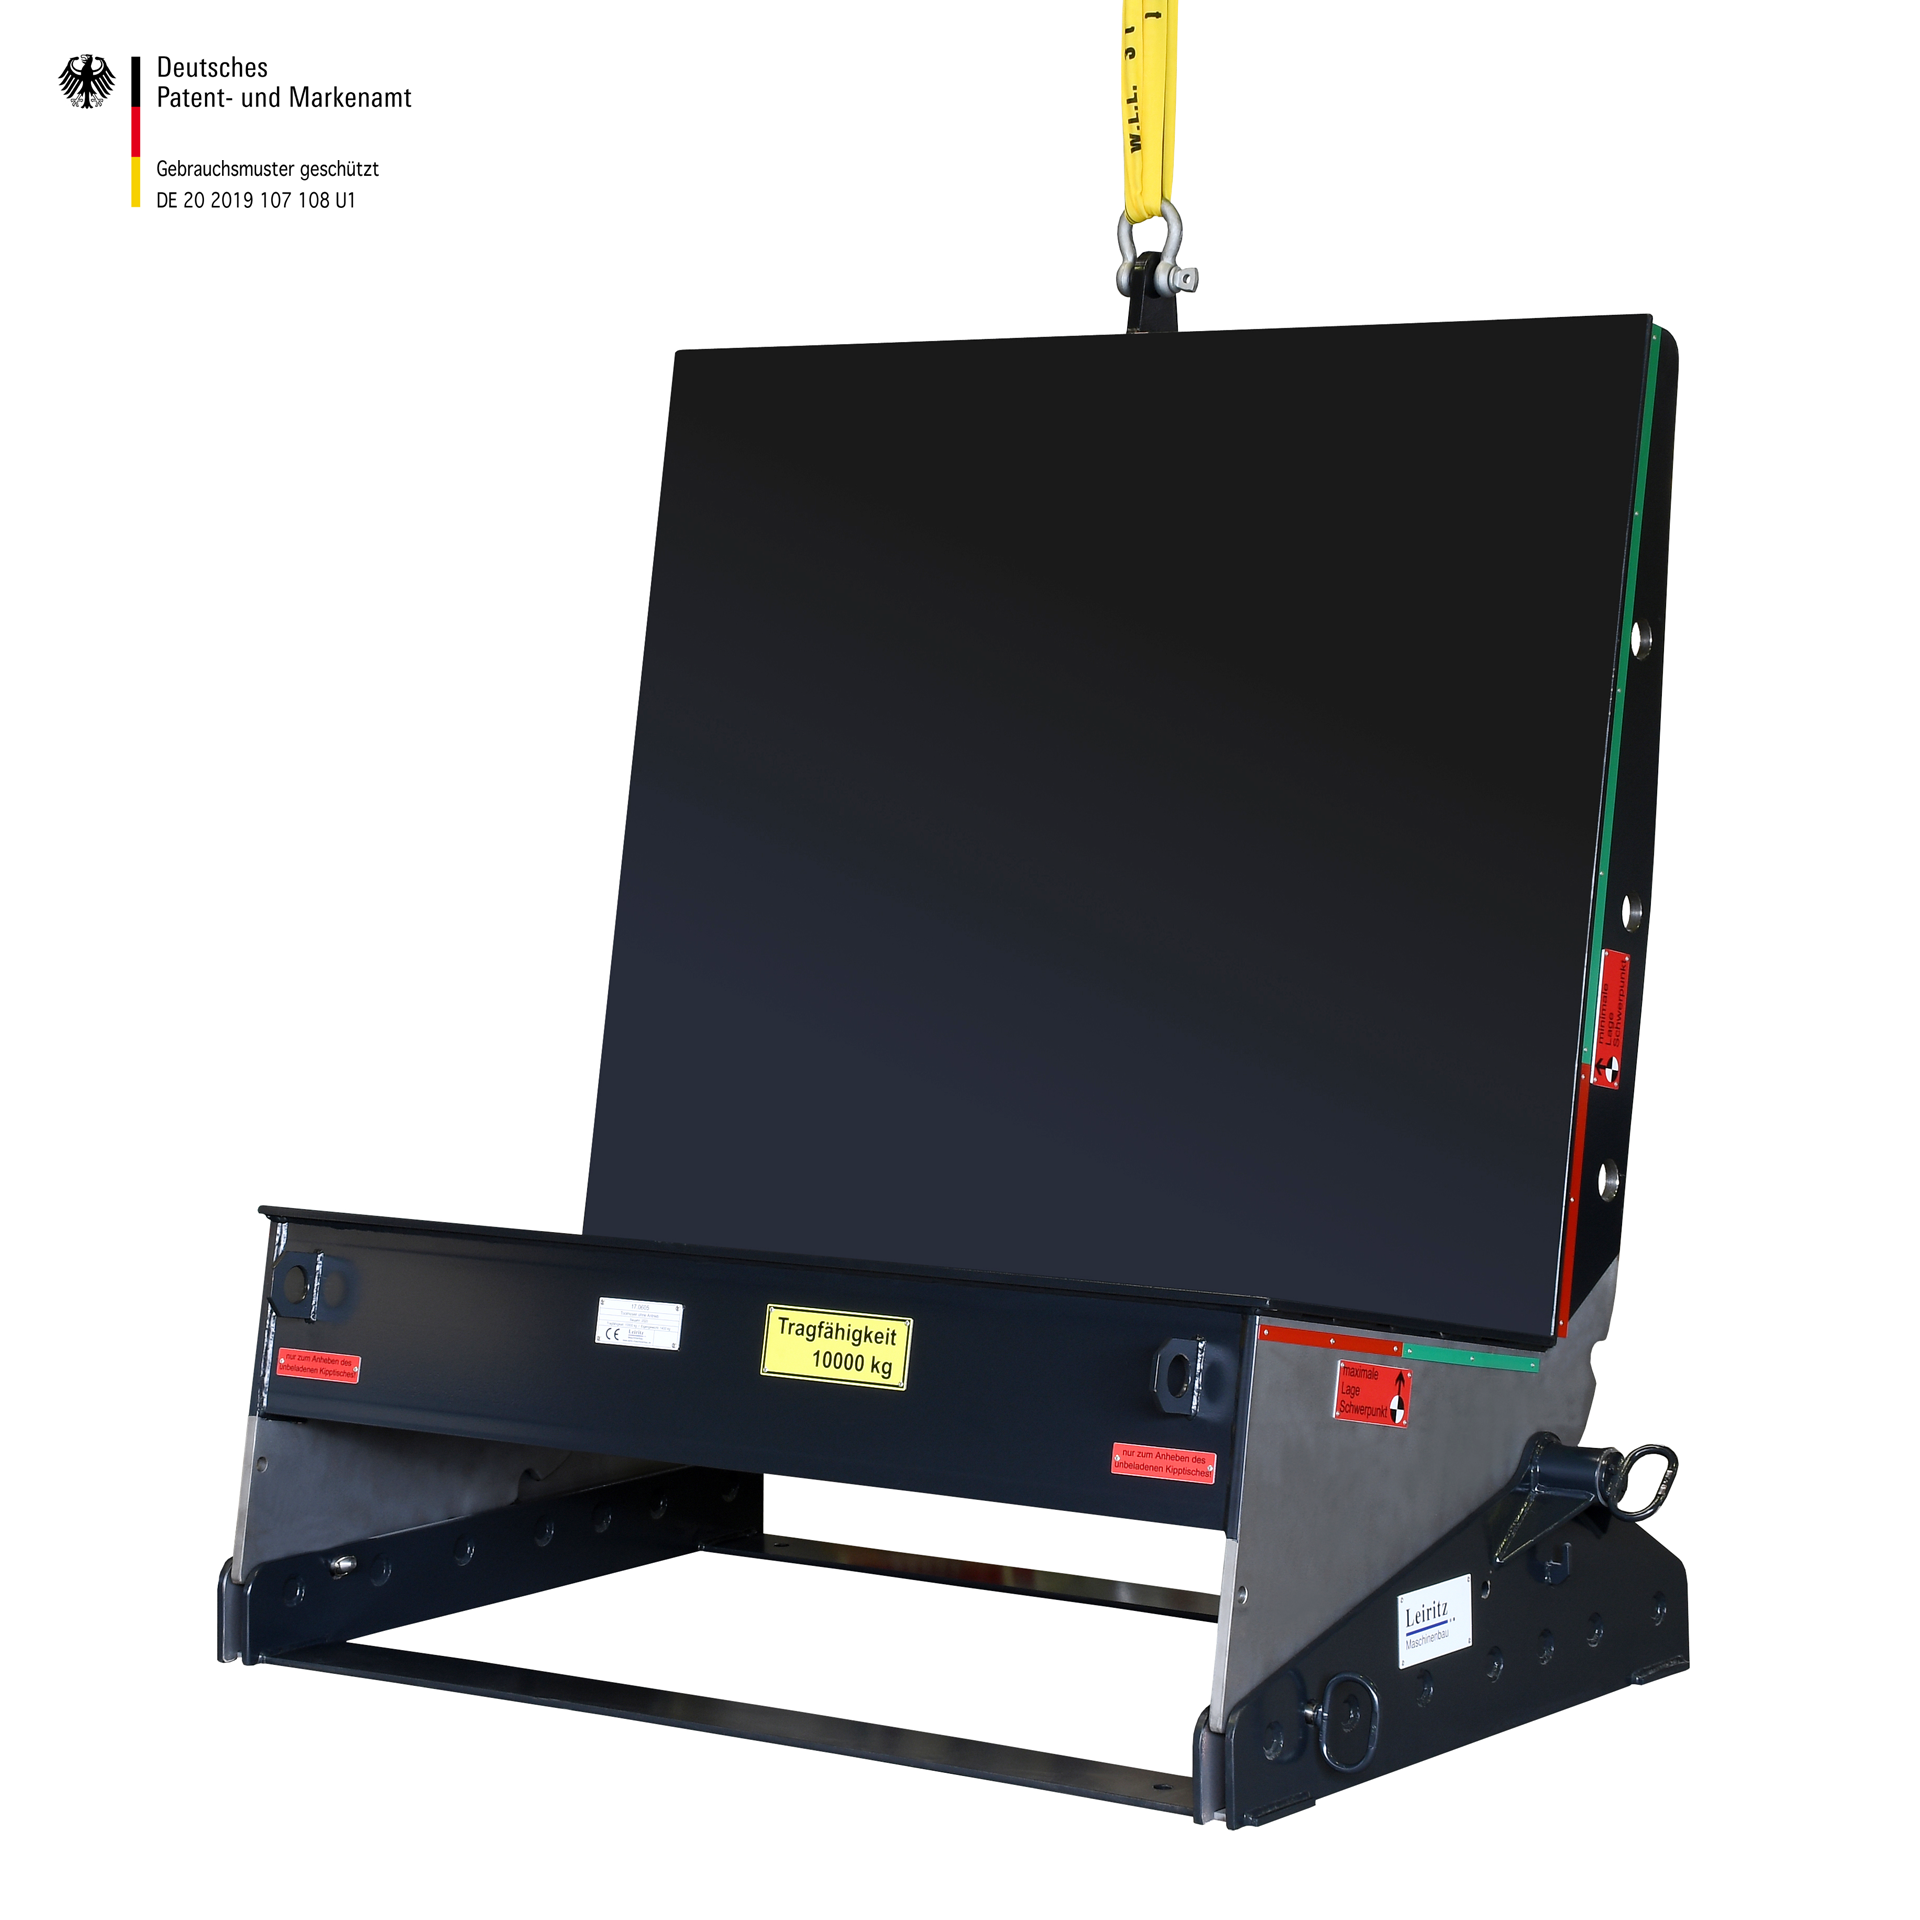 Low Cost crane version Tool Mover, Turnover Device from Leiritz Maschinenbau.